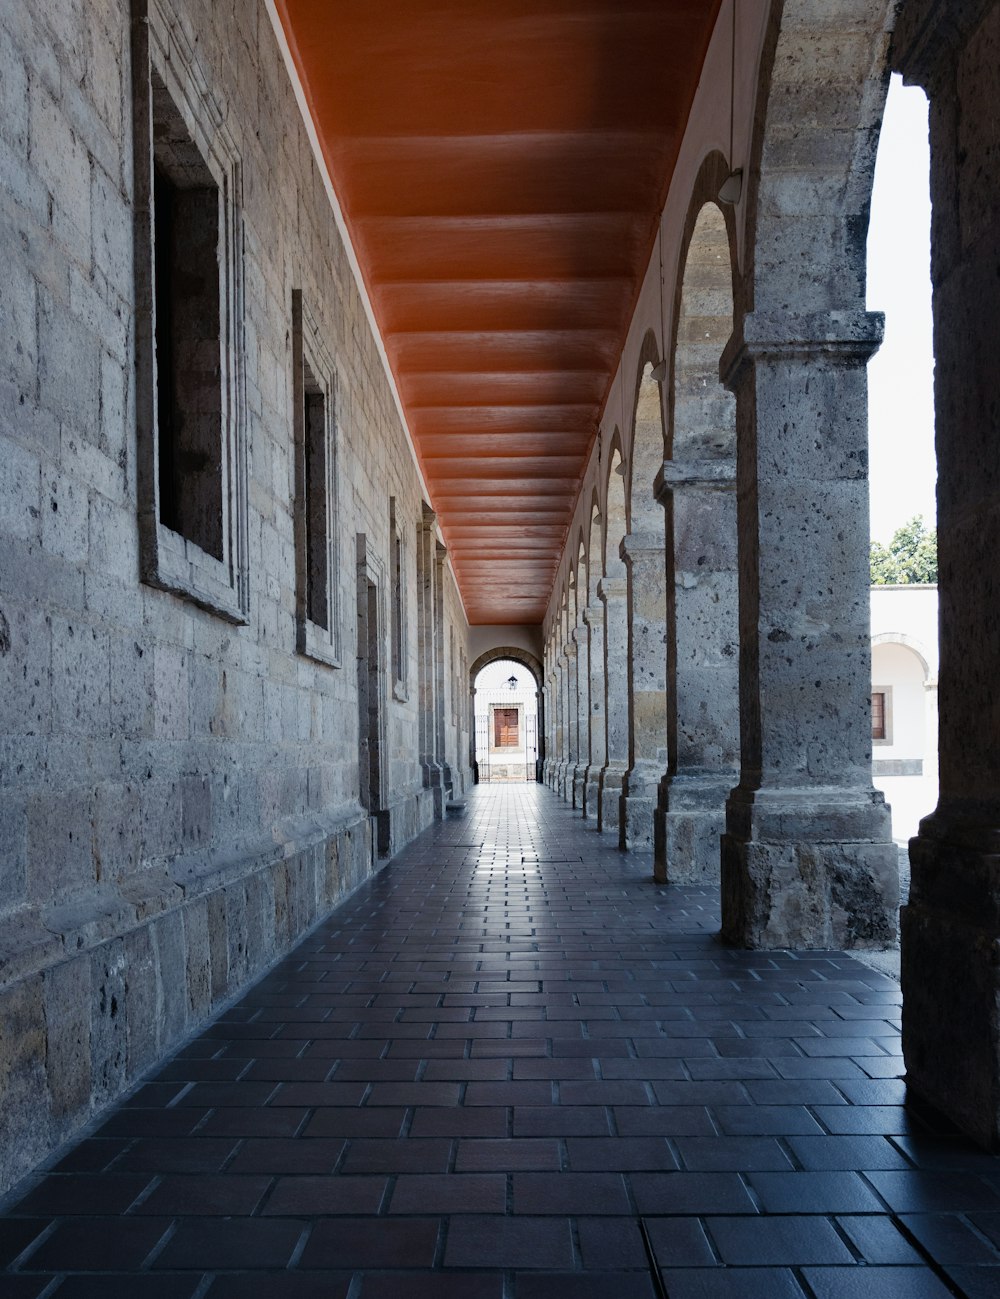 a long hallway with stone pillars and a red roof